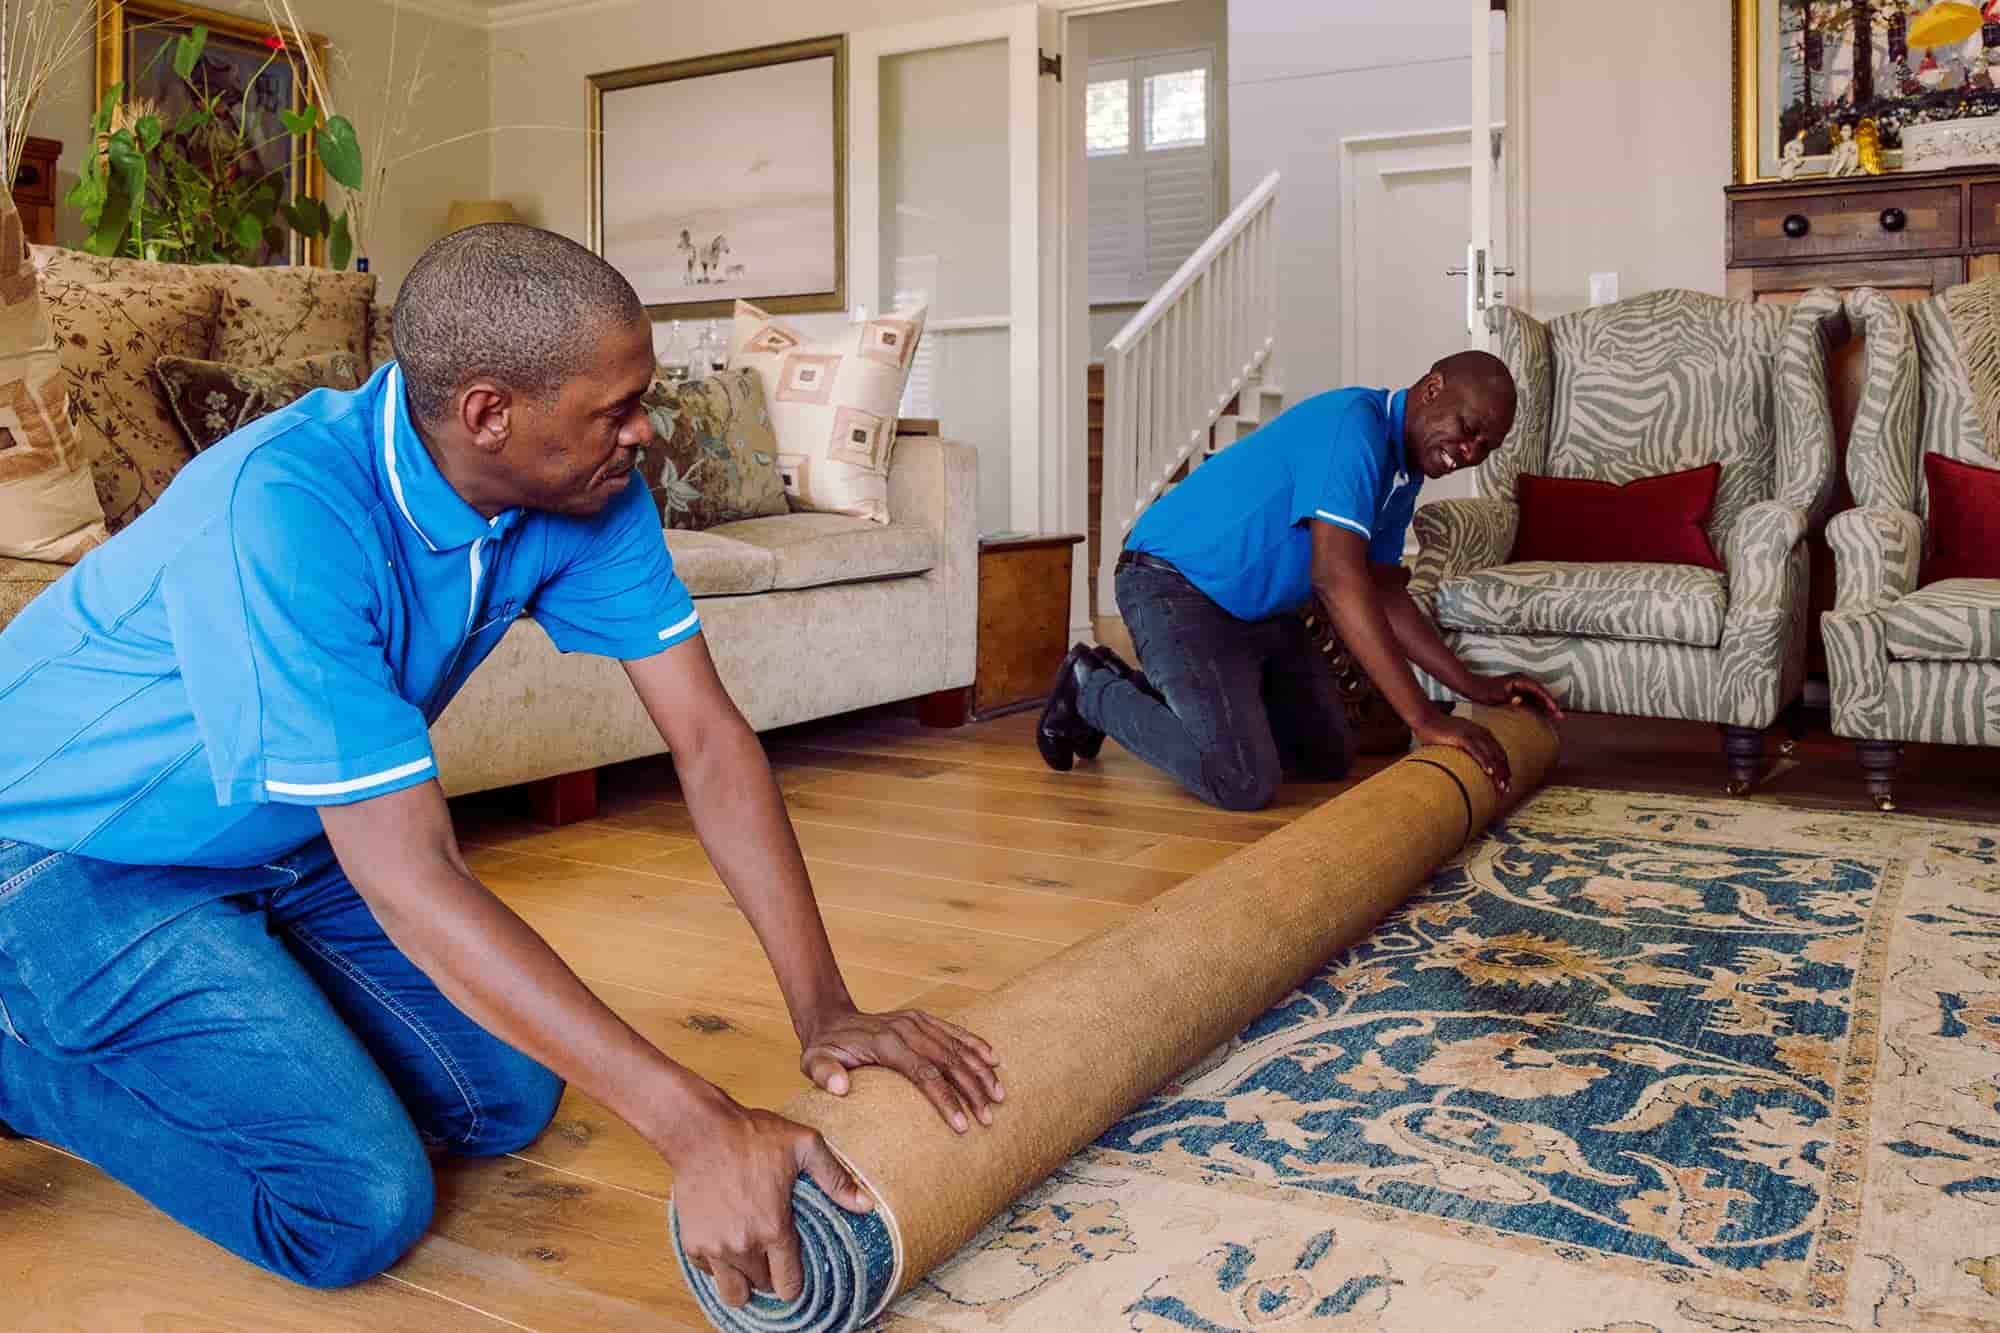 Moving Companies South Africa - Hire the Right Moving Company